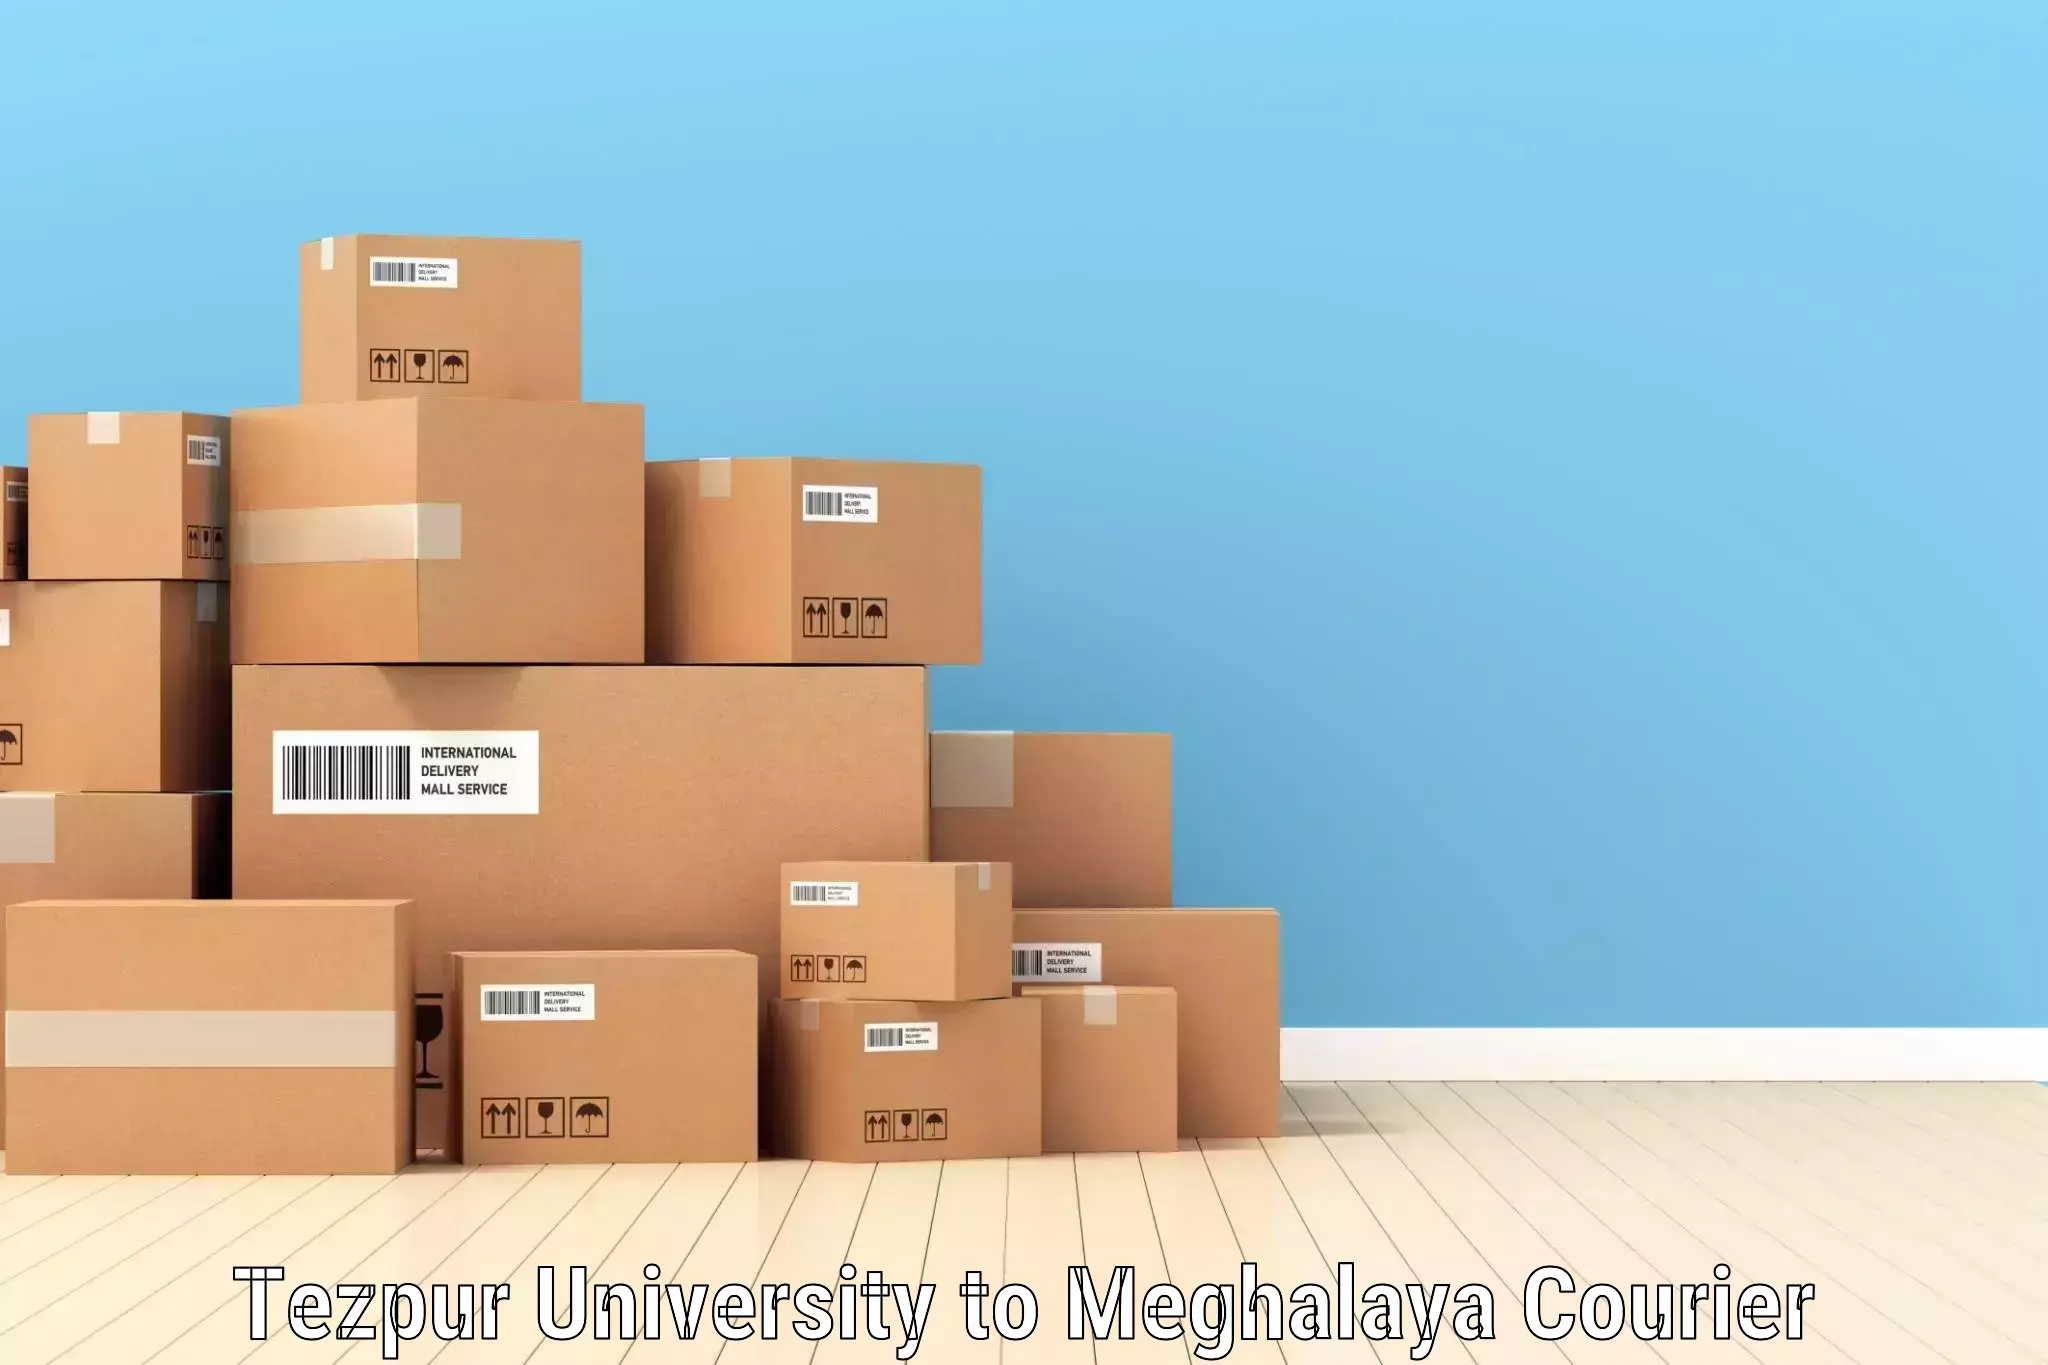 Reliable courier services Tezpur University to Meghalaya